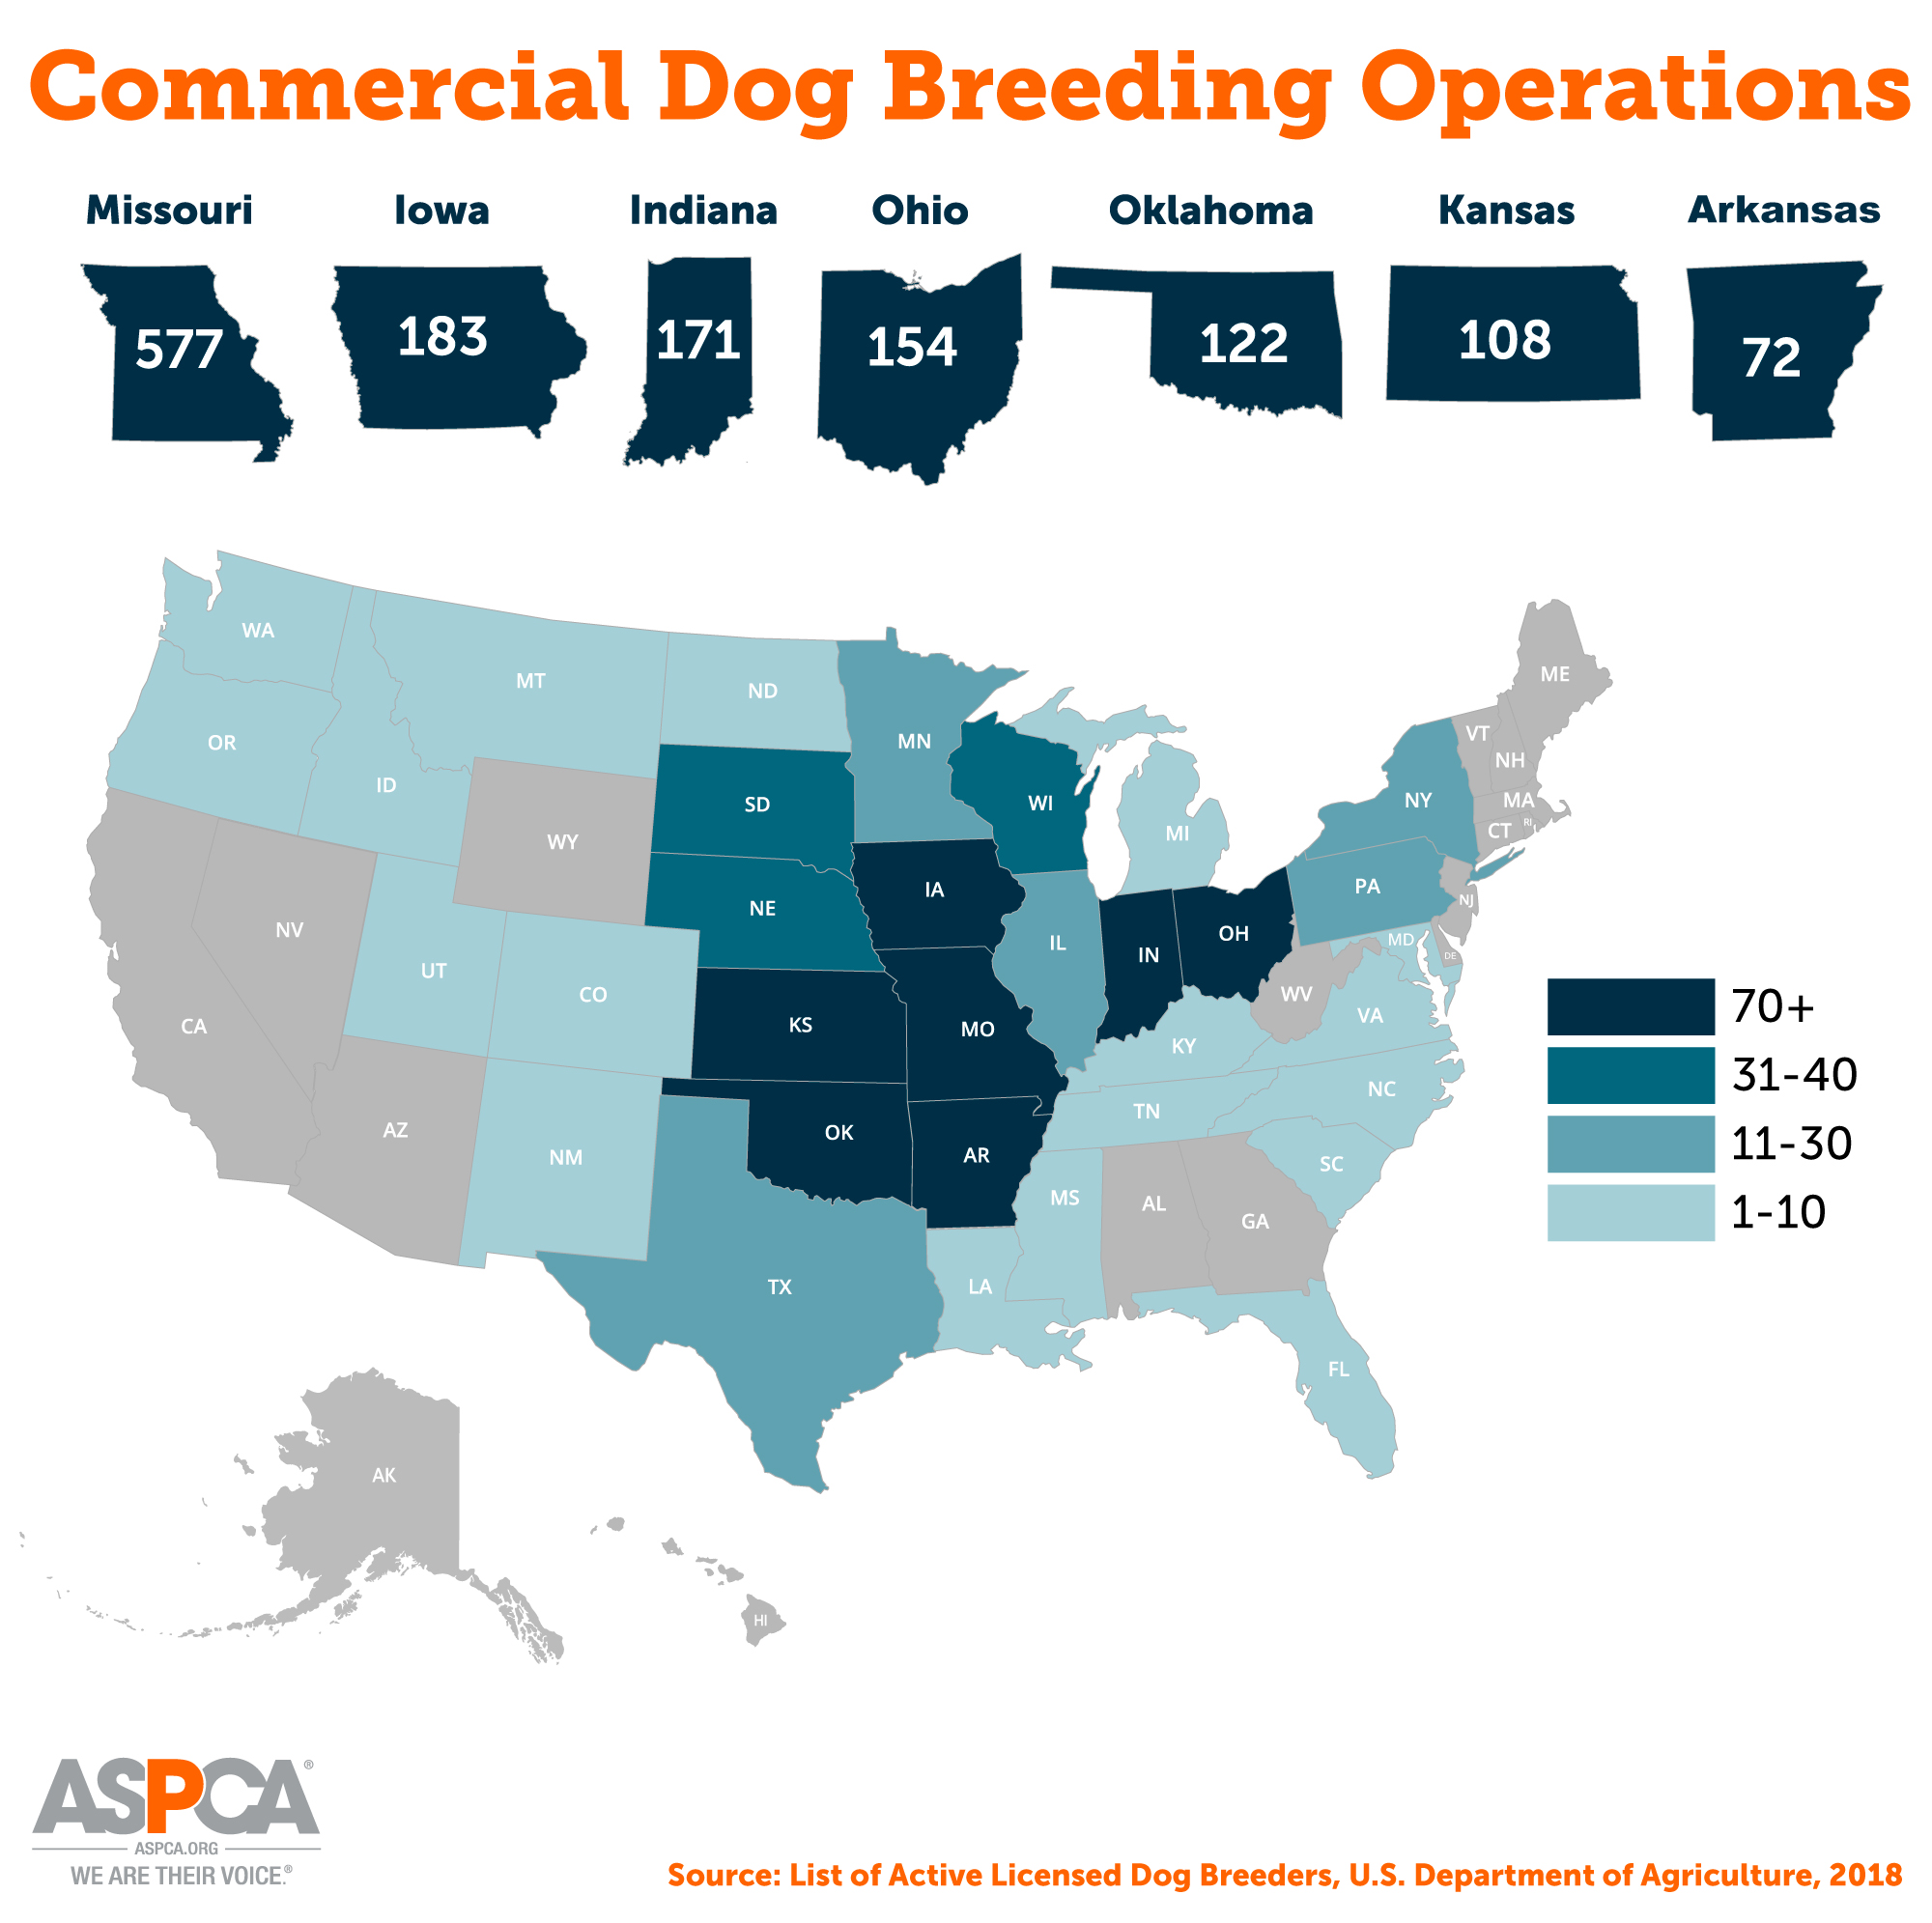 map of commercial dog breeding operations within the united states